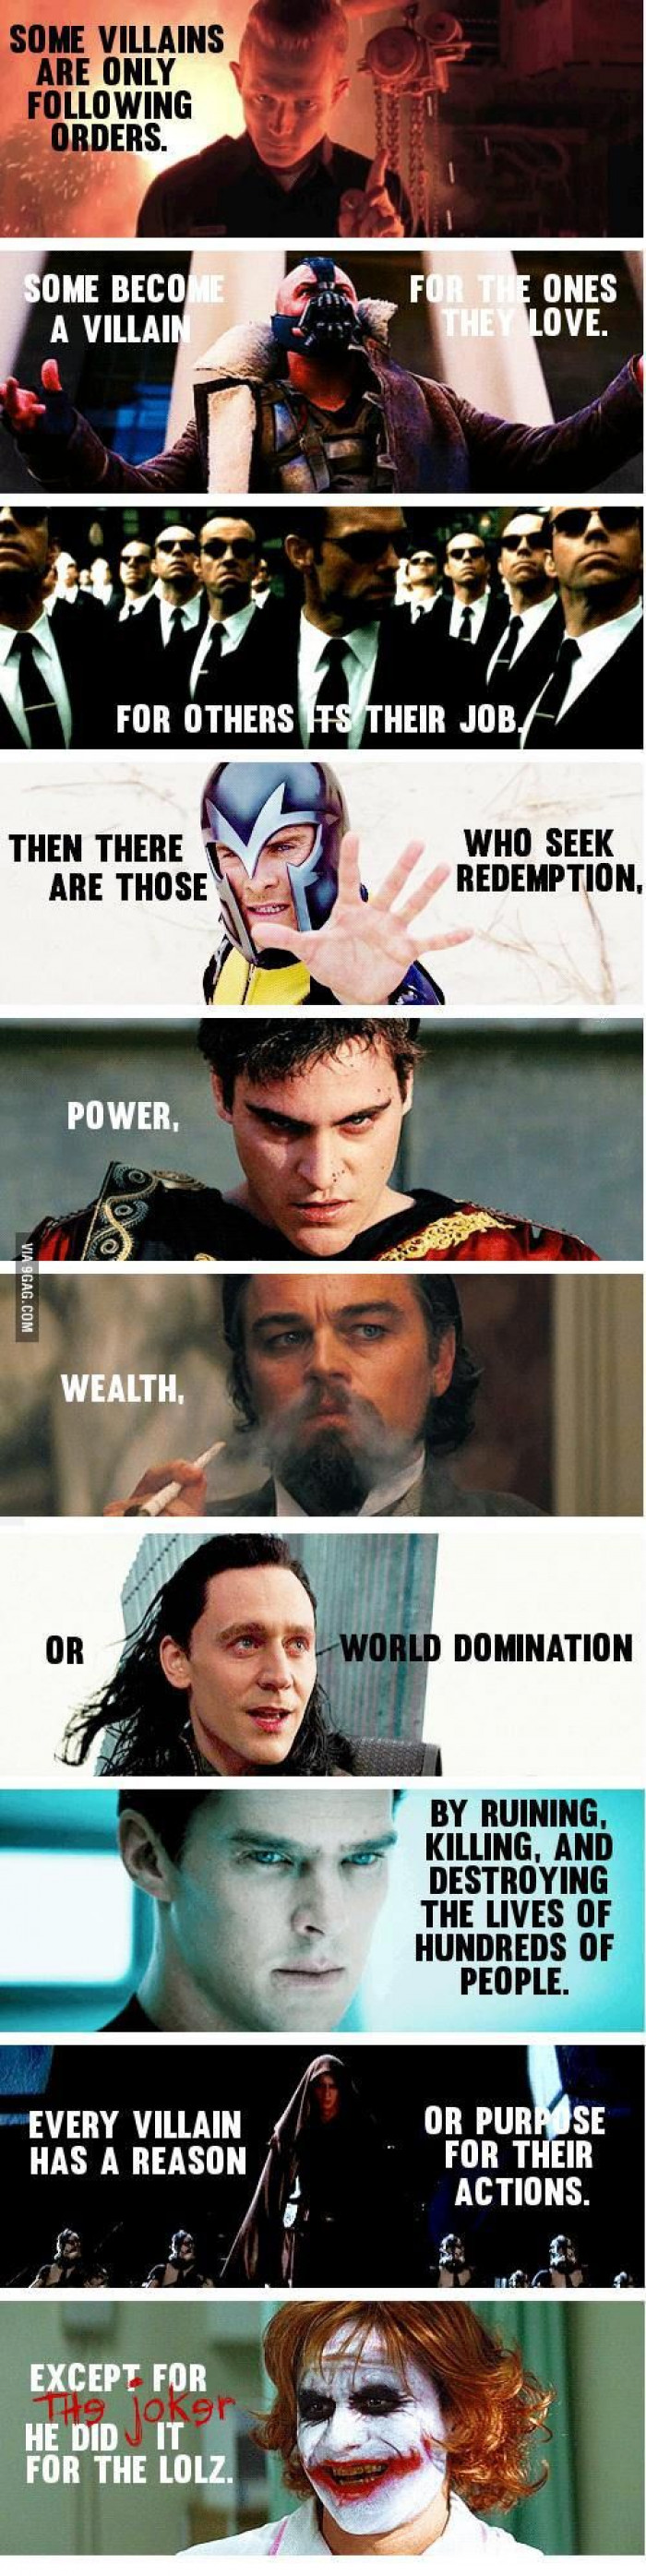 Every Villain Has A Reason... Except One